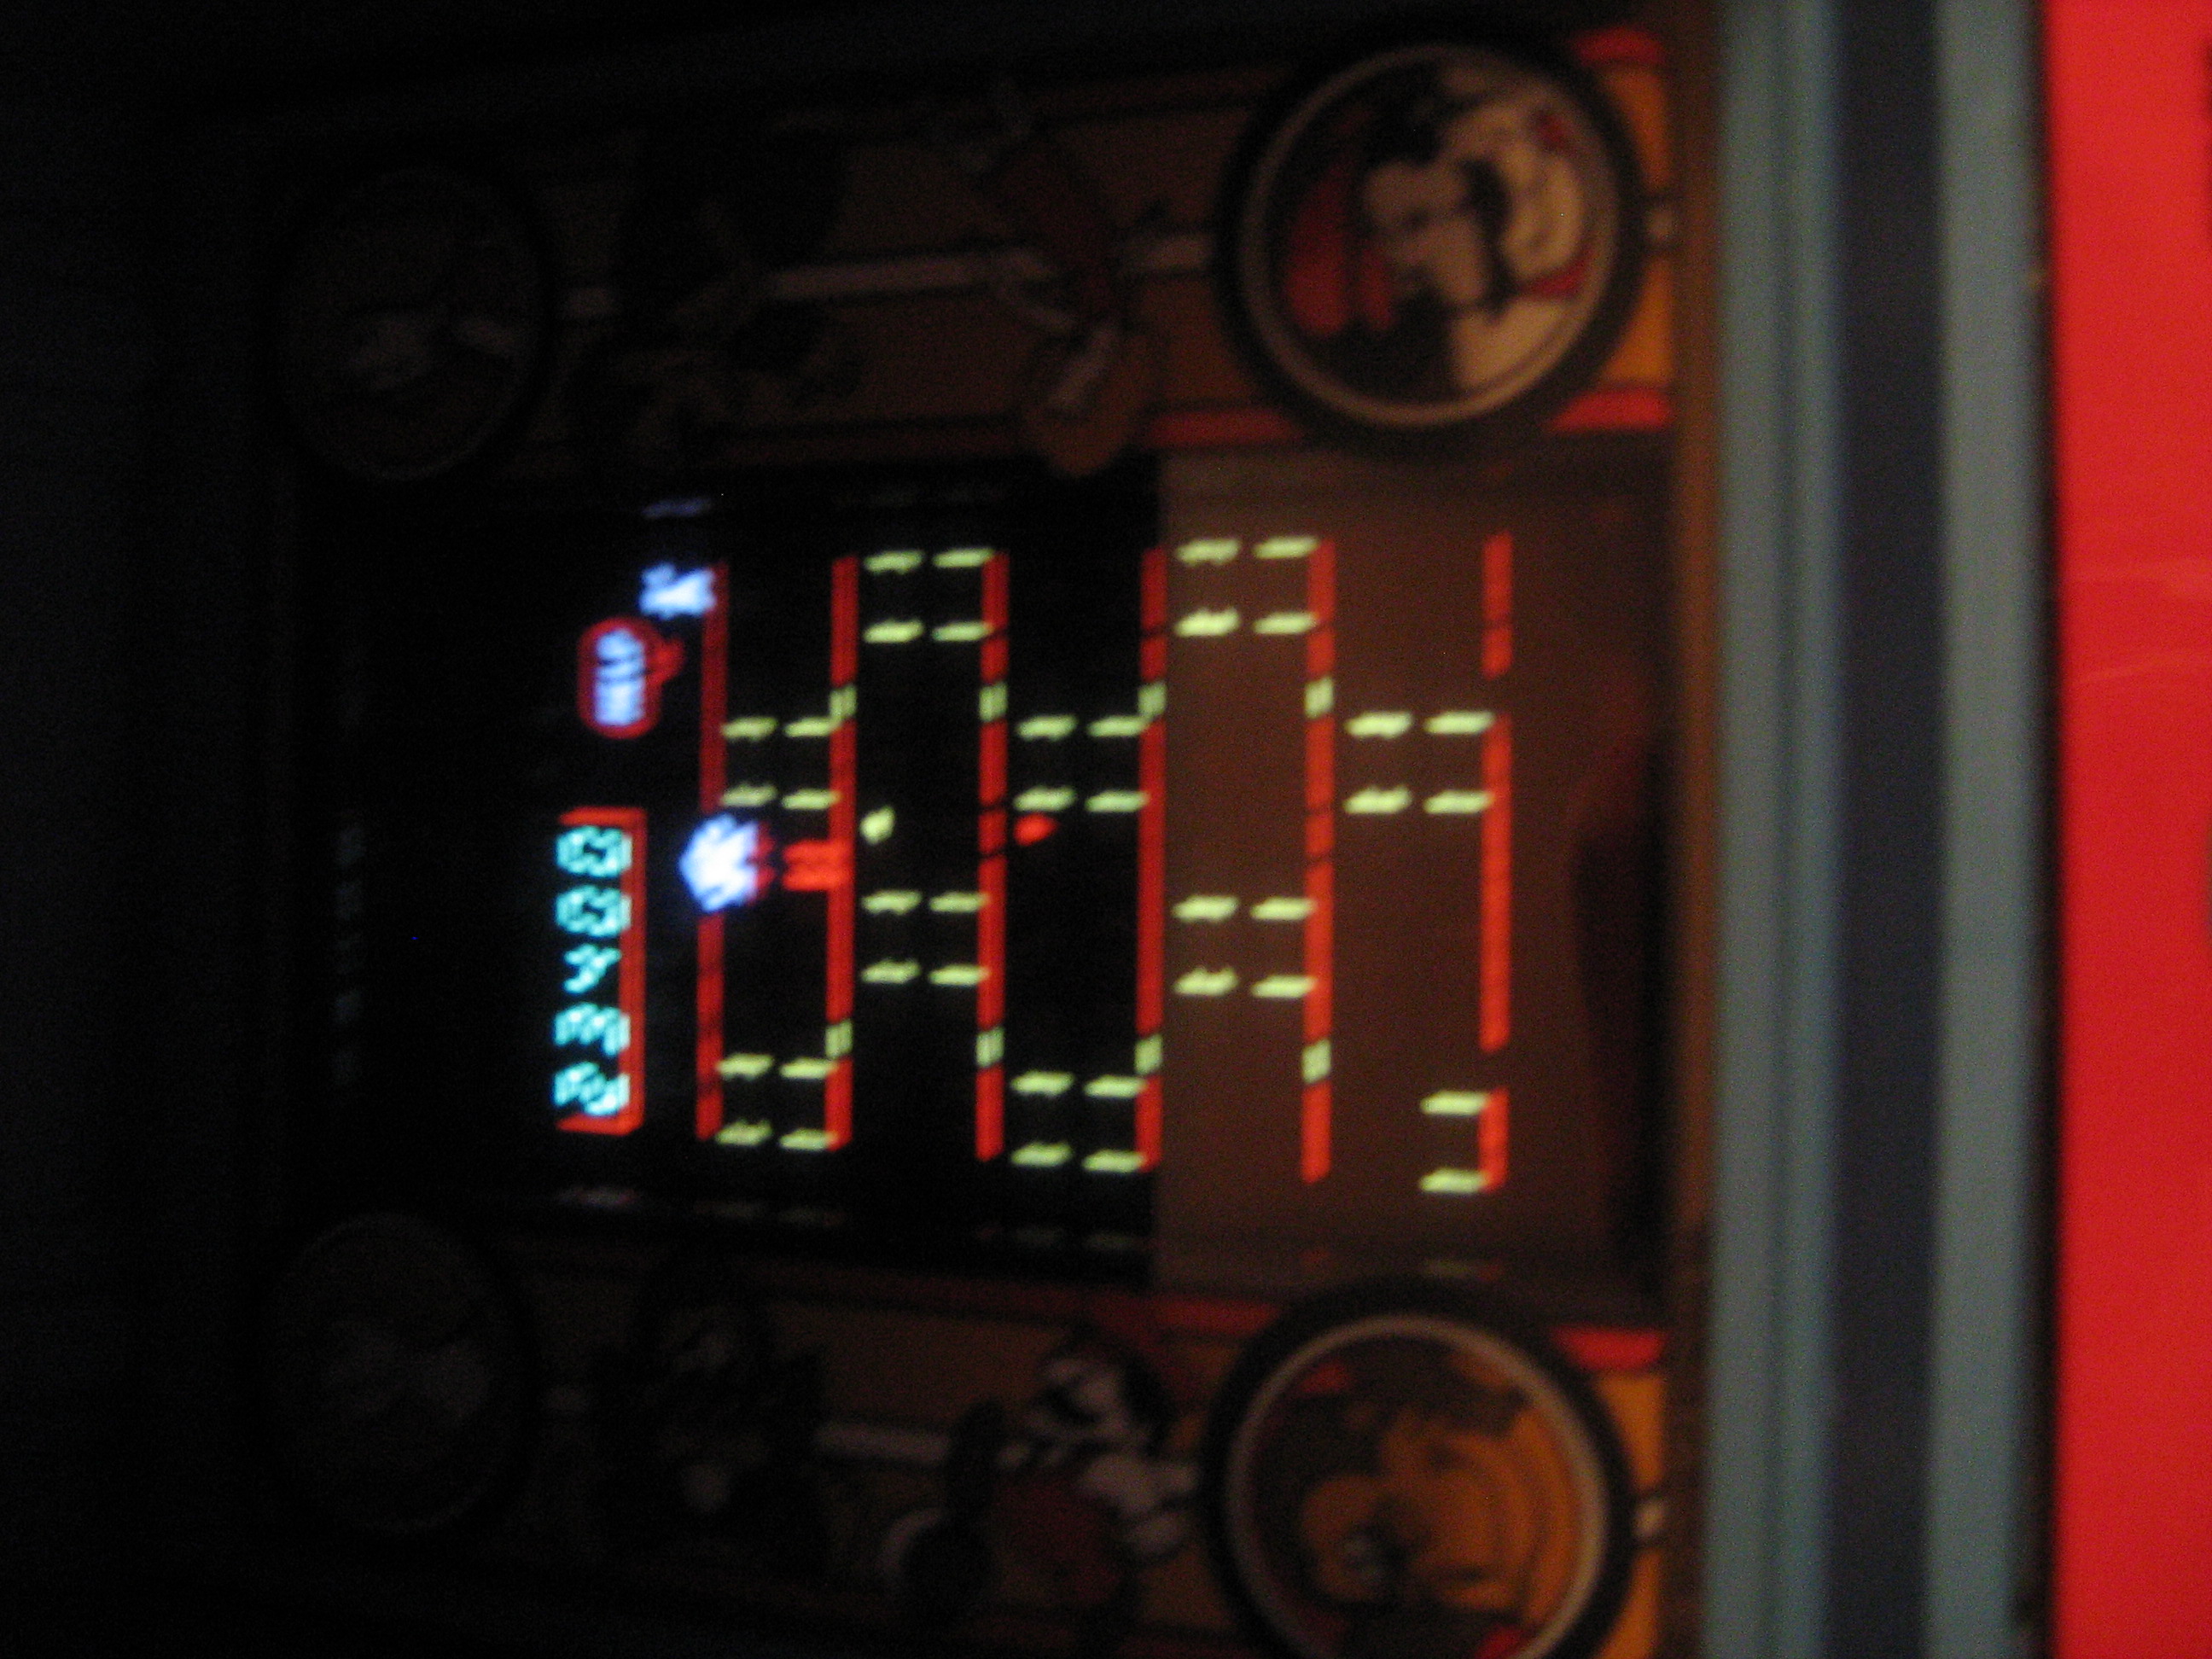 arenafoot: Coleco Donkey Kong (Dedicated Handheld) 23,400 points on 2014-04-19 10:54:14